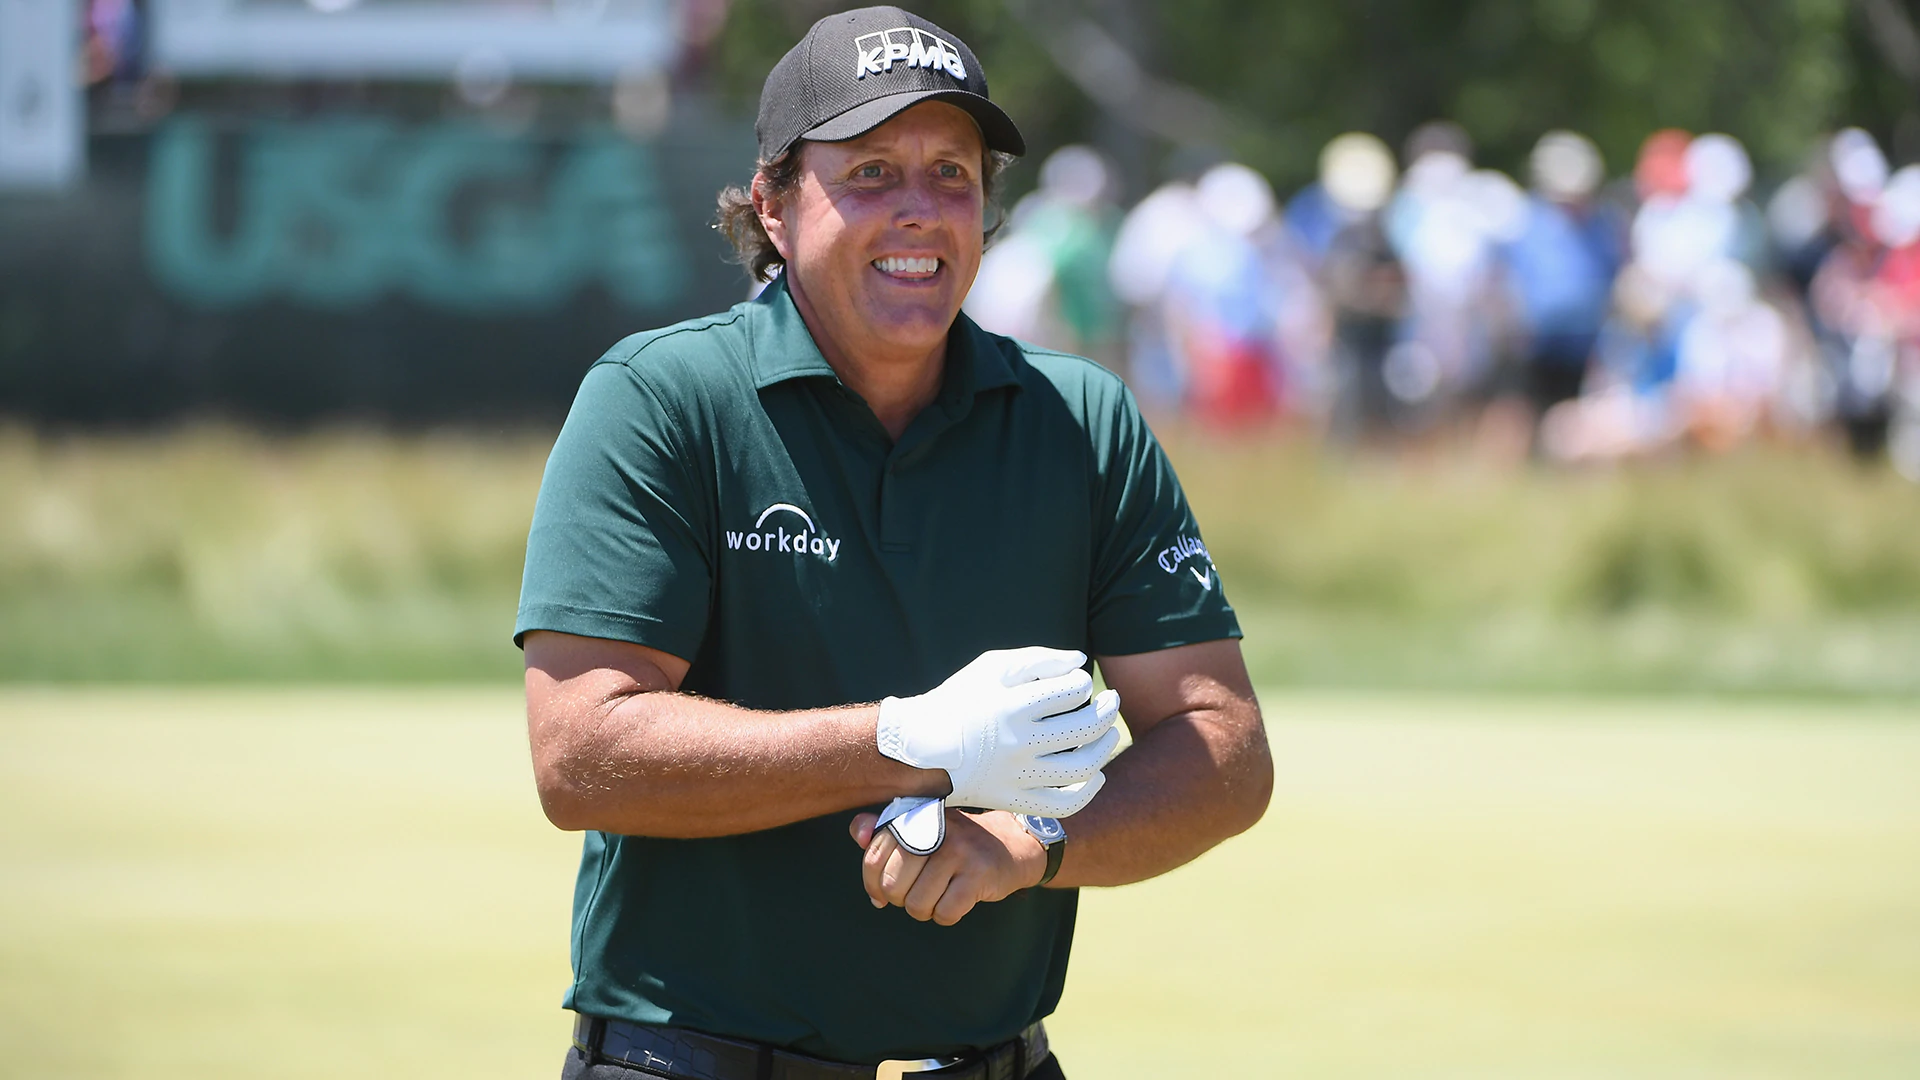 Watch: Phil takes 2-shot penalty for hitting moving ball